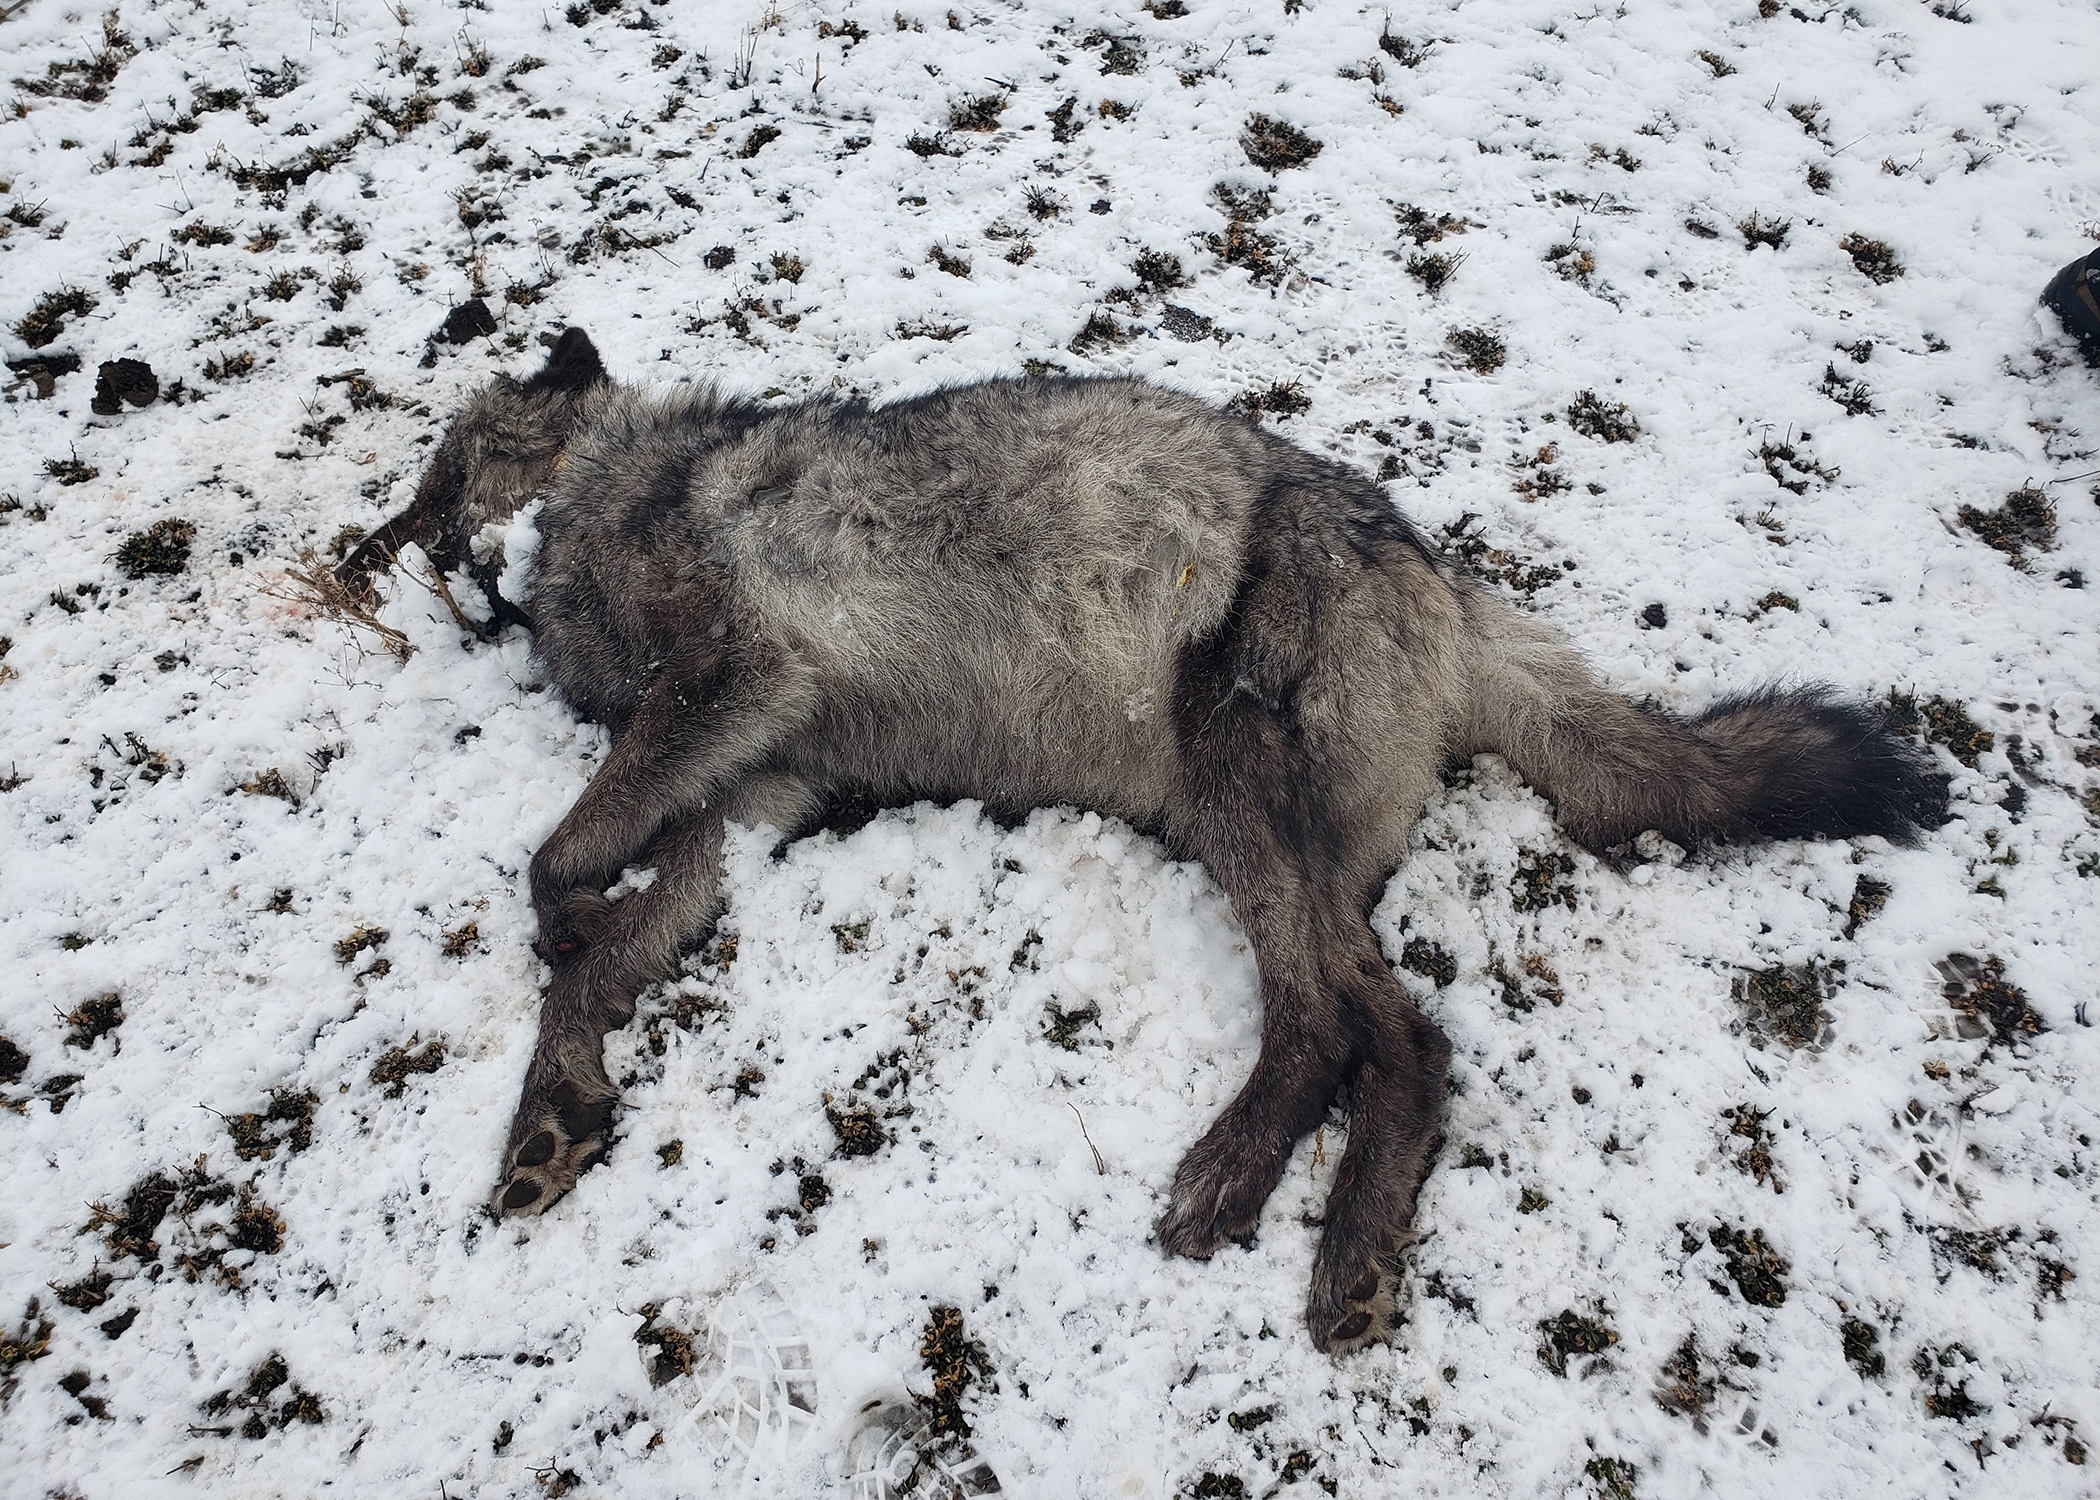 Wolf OR109 was shot near Cove in Union Co. on Feb 15. Non-profits are offering $22,500 for information that leads to an arrest or citation.